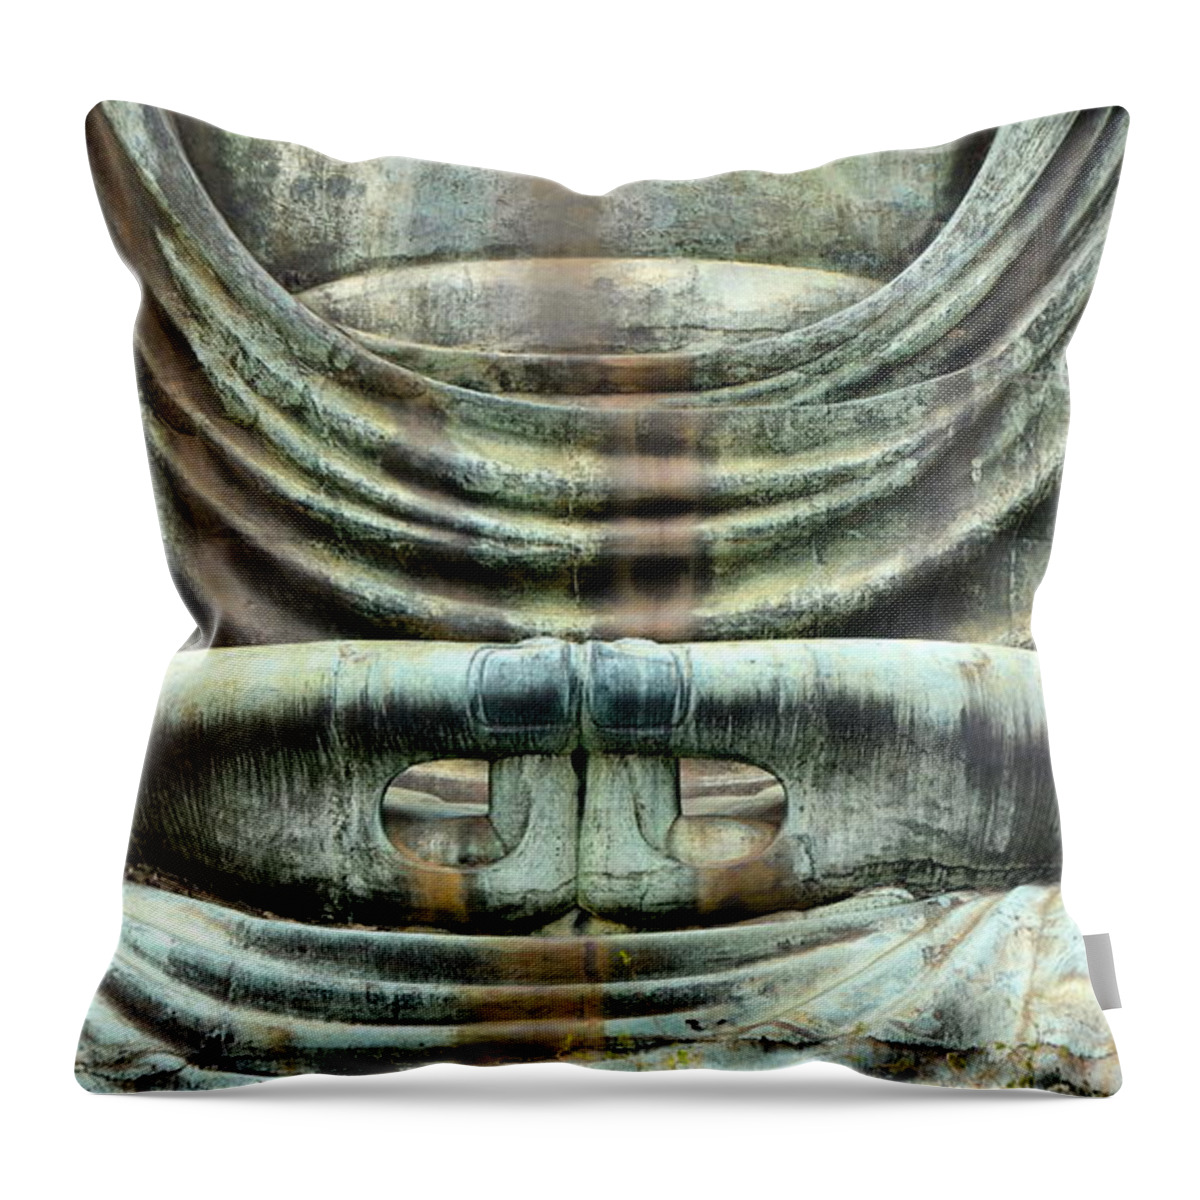 Grand Buddha Throw Pillow featuring the photograph Contemplation by Corinne Rhode